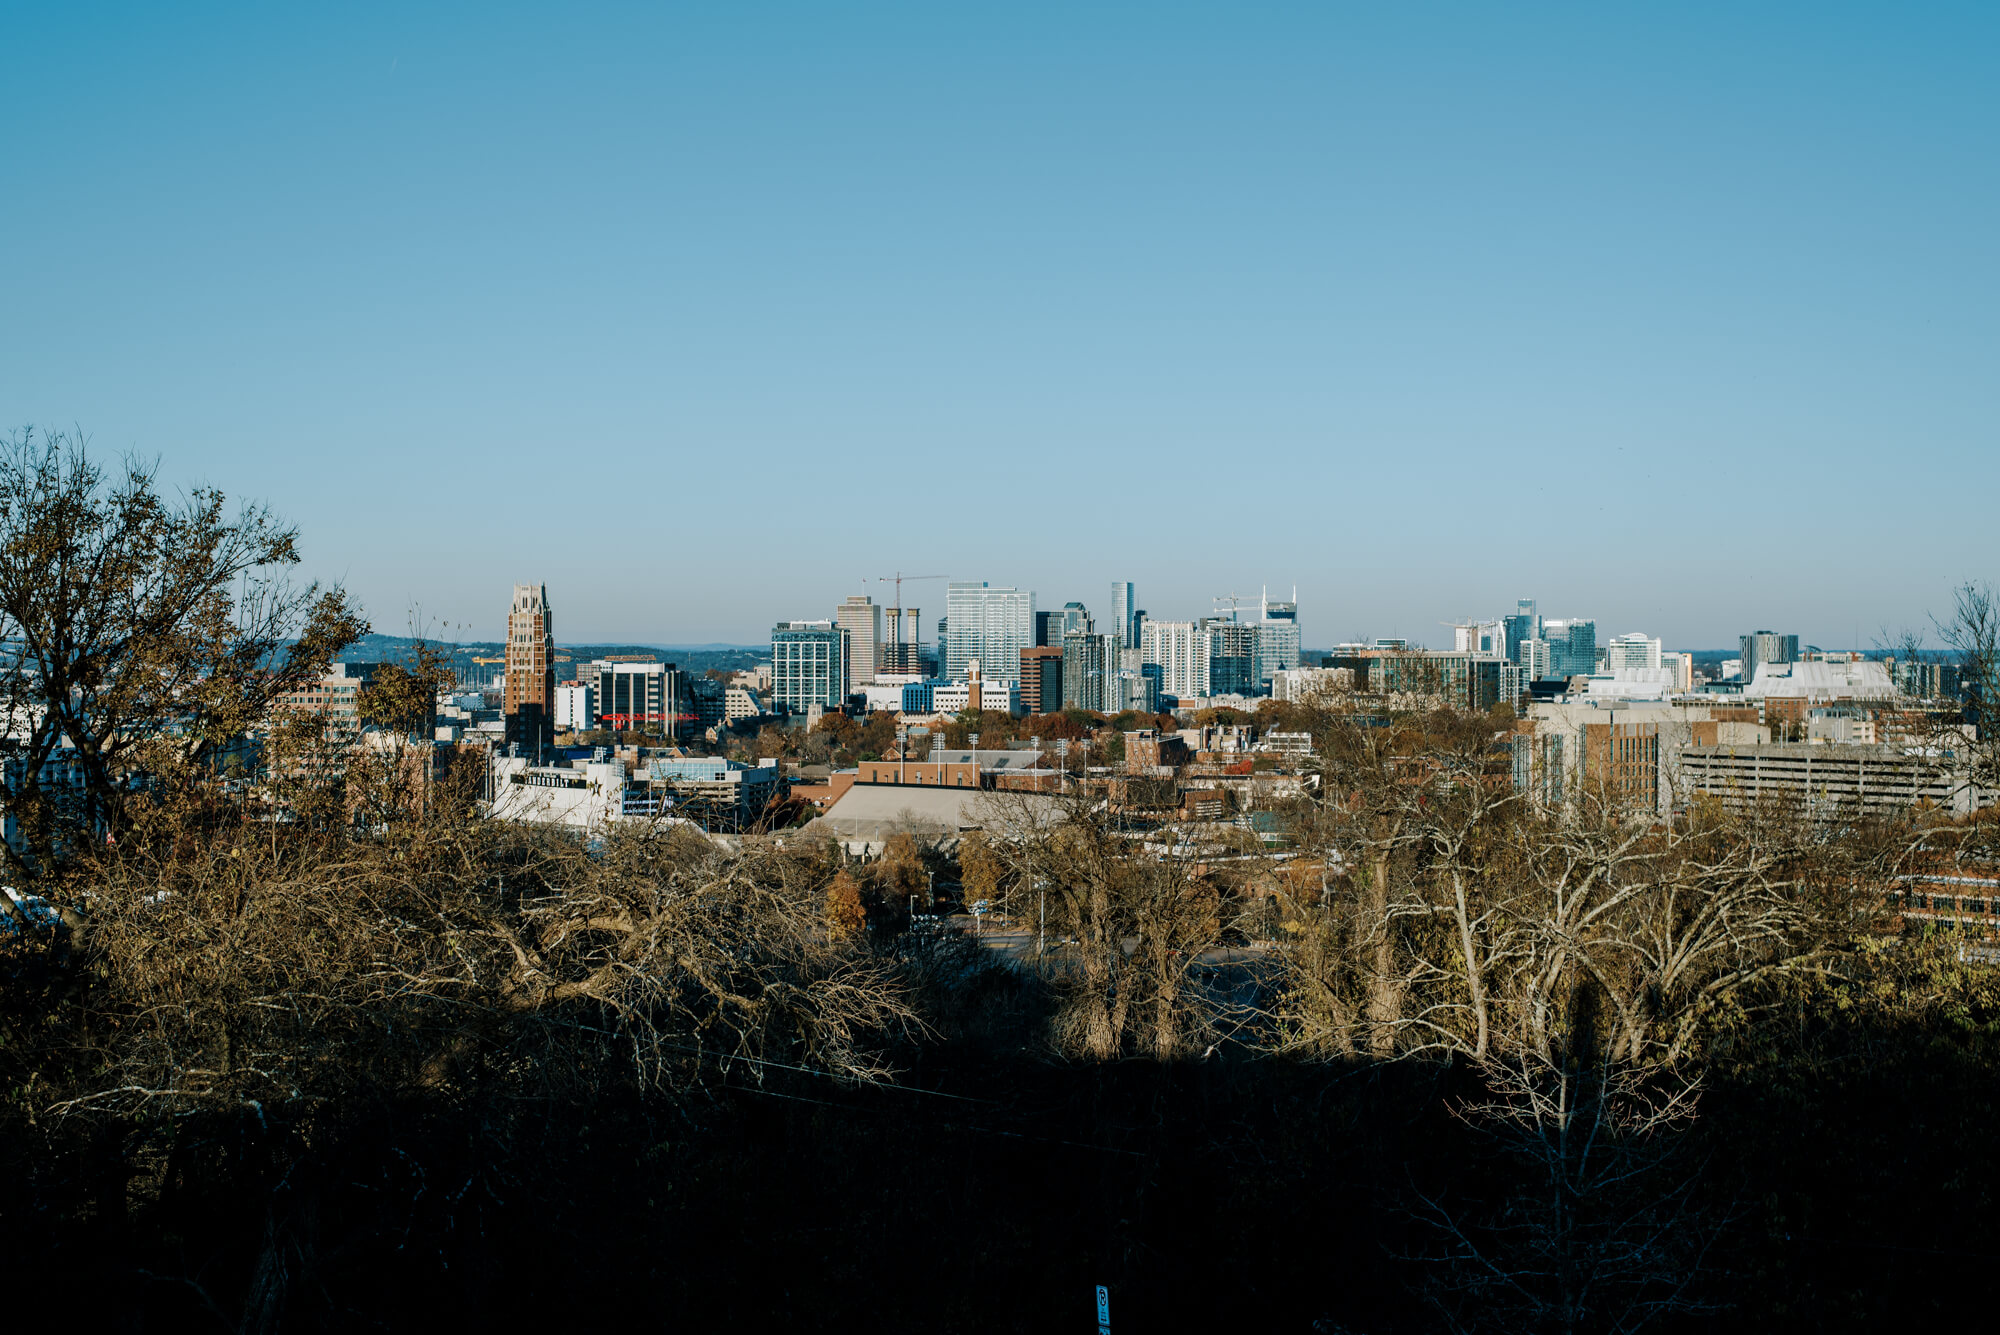 Nashville skyline at sunset from Love Circle, a small hilltop by Centennial Park